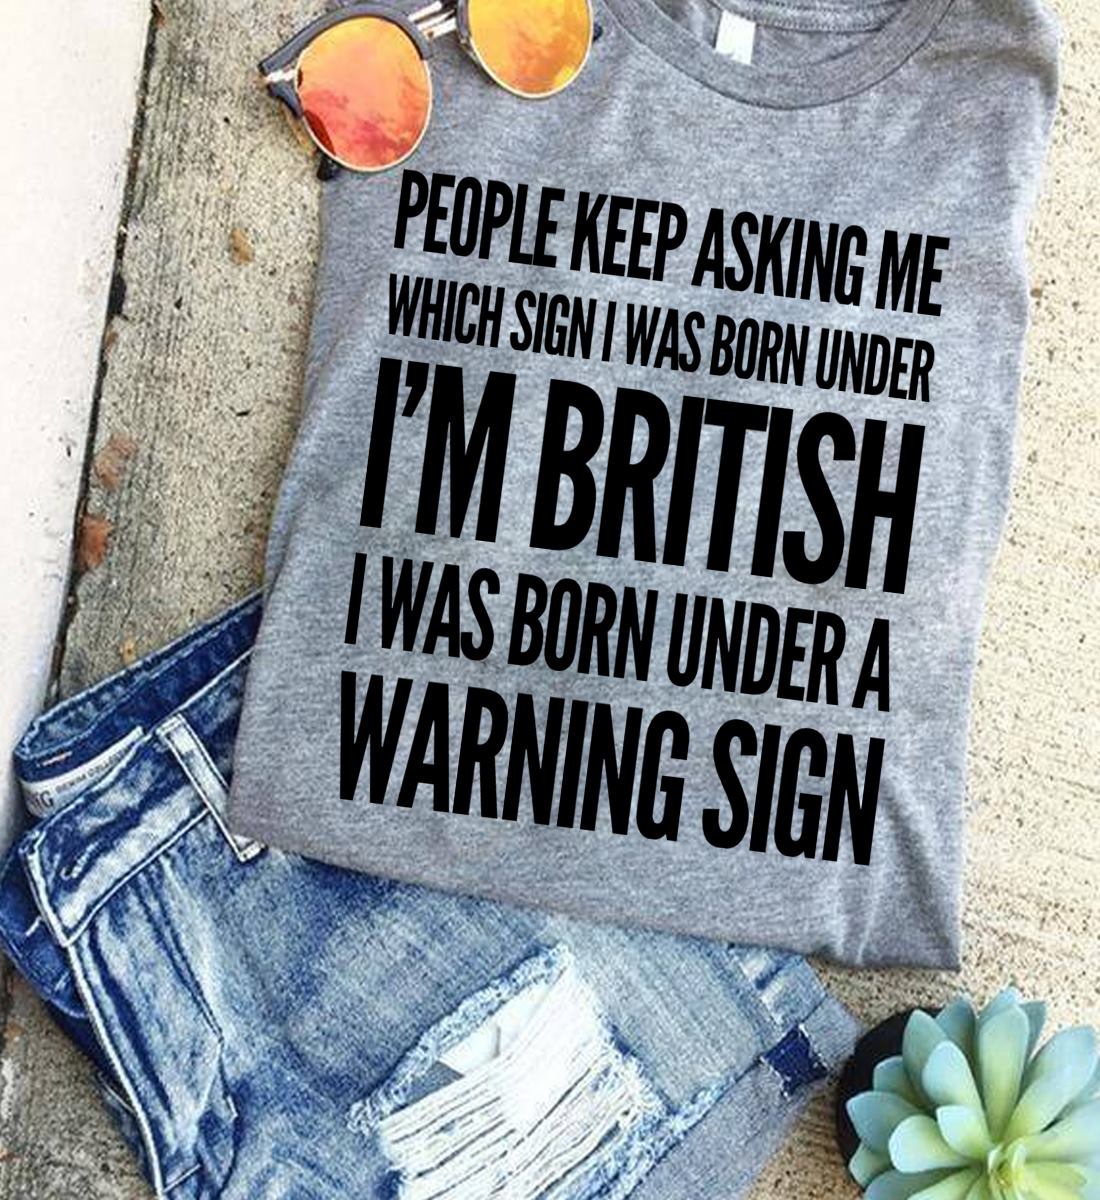 People keep asking me which sign I was born under I'm British I was born under a warning sign